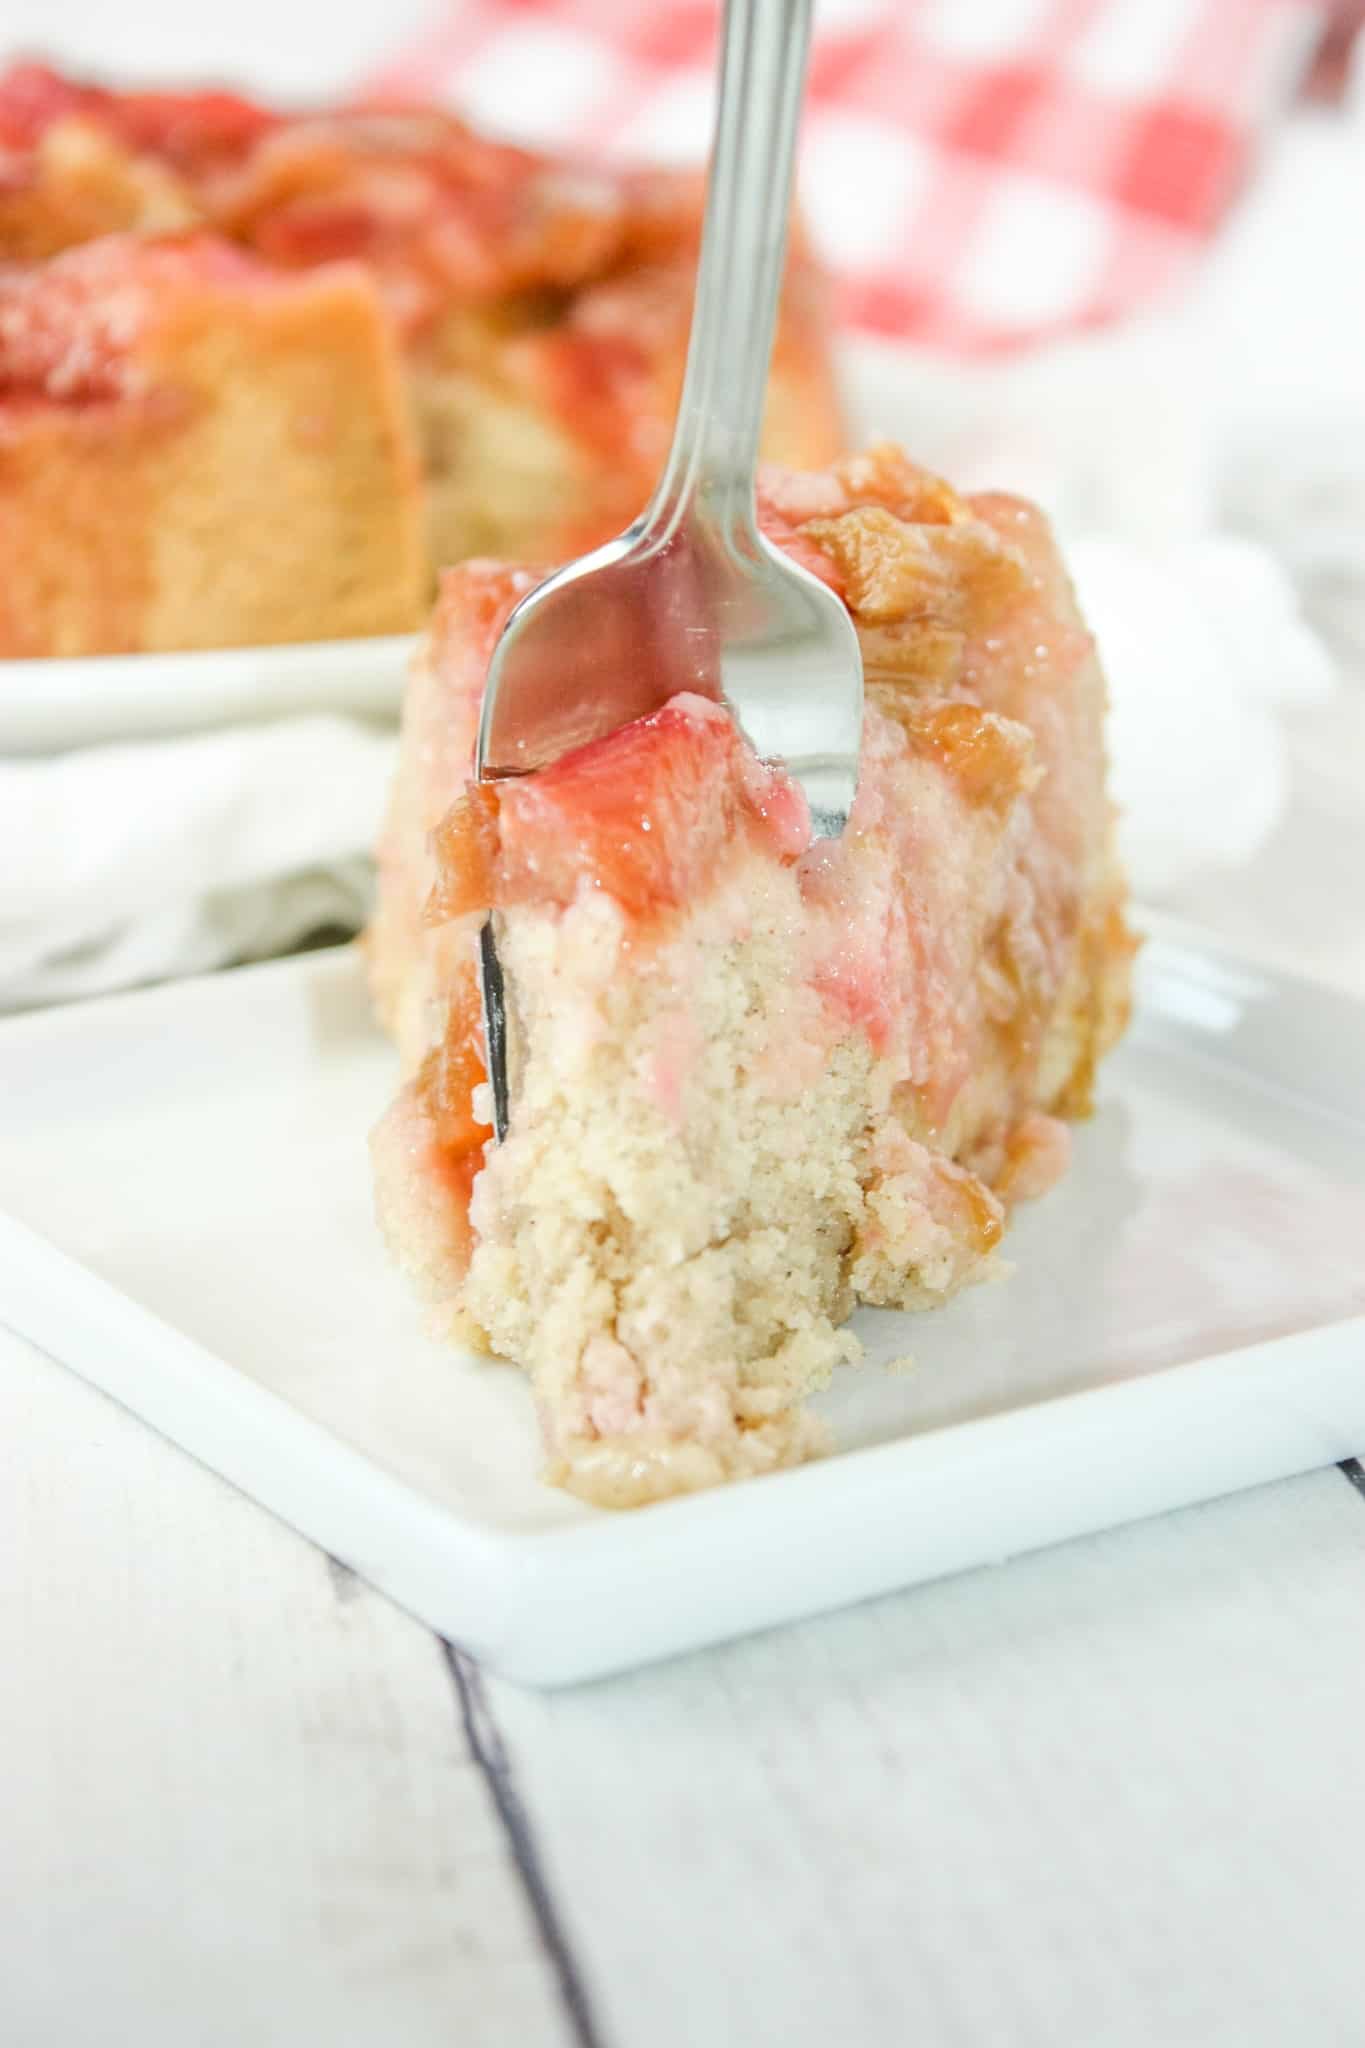 Rhubarb Upside Down Cake is a delicious and easy way to use up that seasonal vegetable that we treat more like a fruit!  This gluten free cake is a moist and flavourful dessert for all to enjoy.